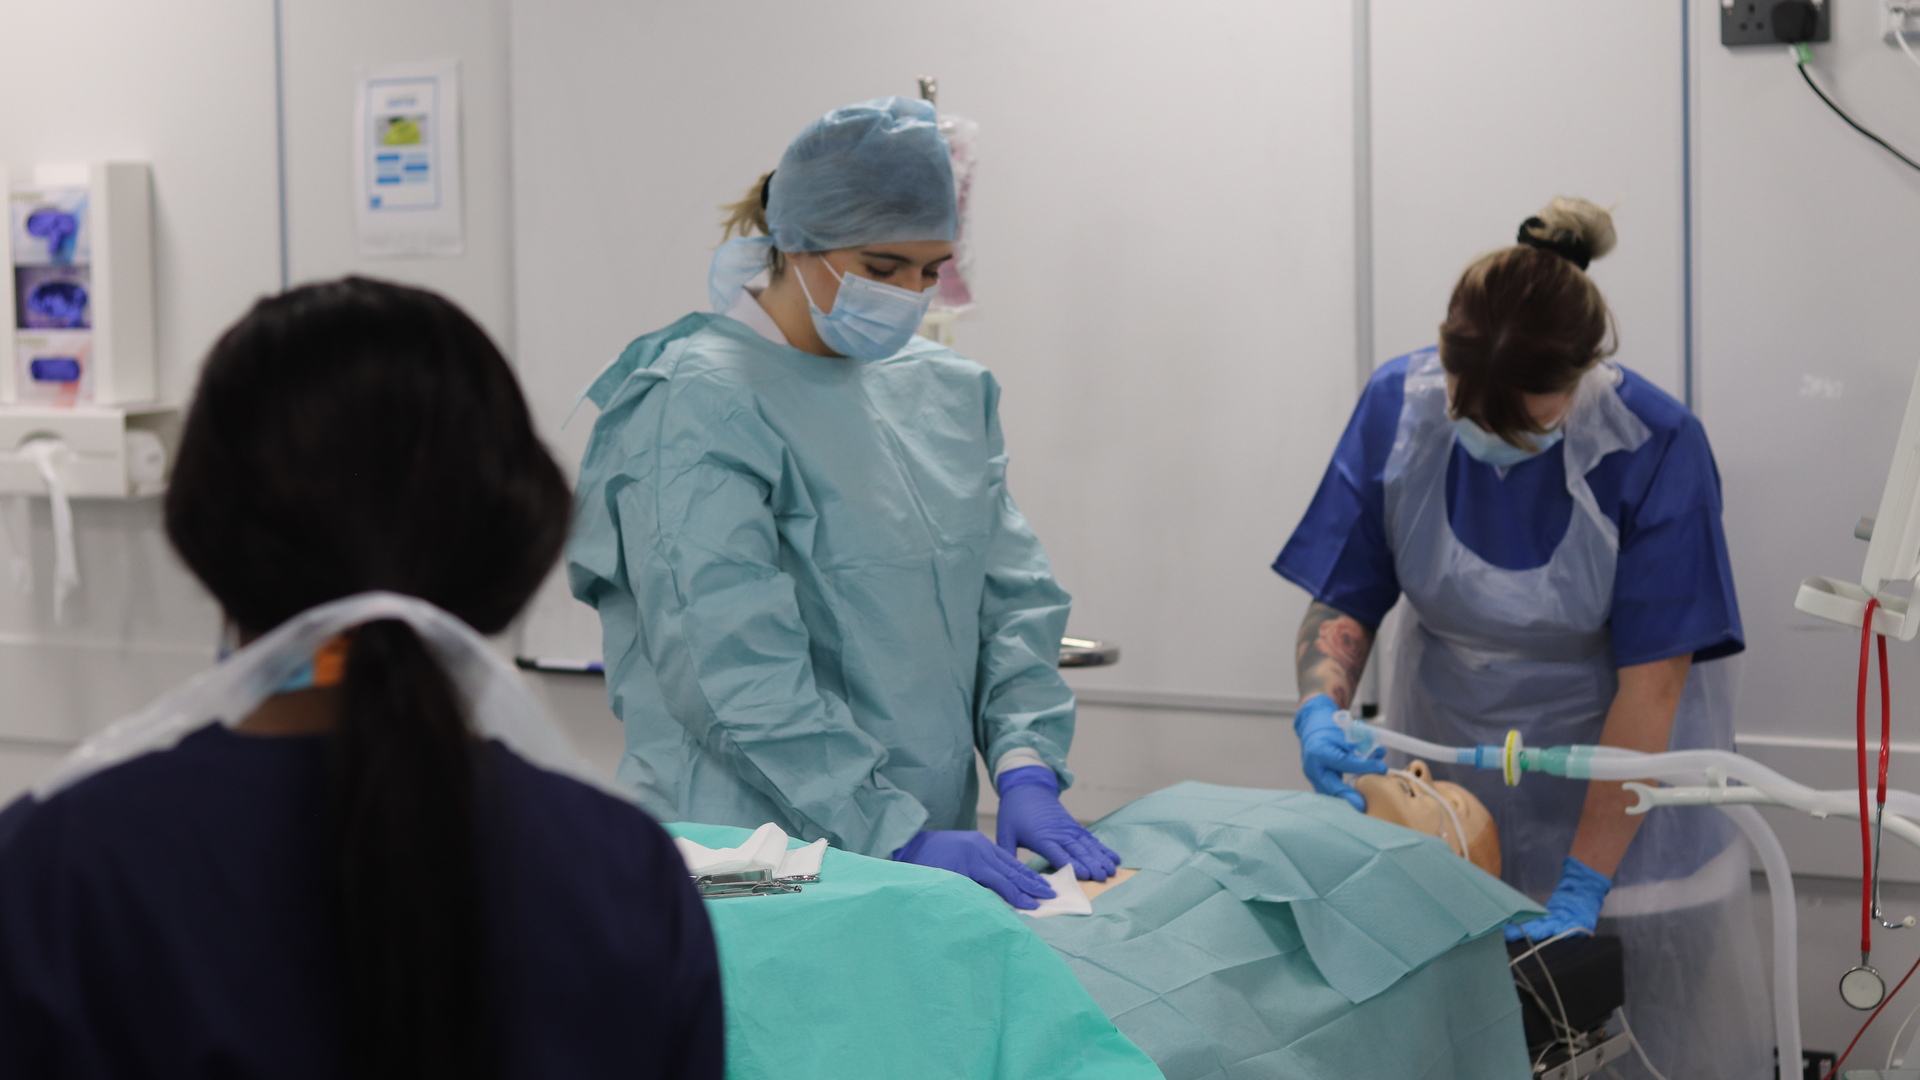 ODP students during a simulation in the Centre for Health Innovation